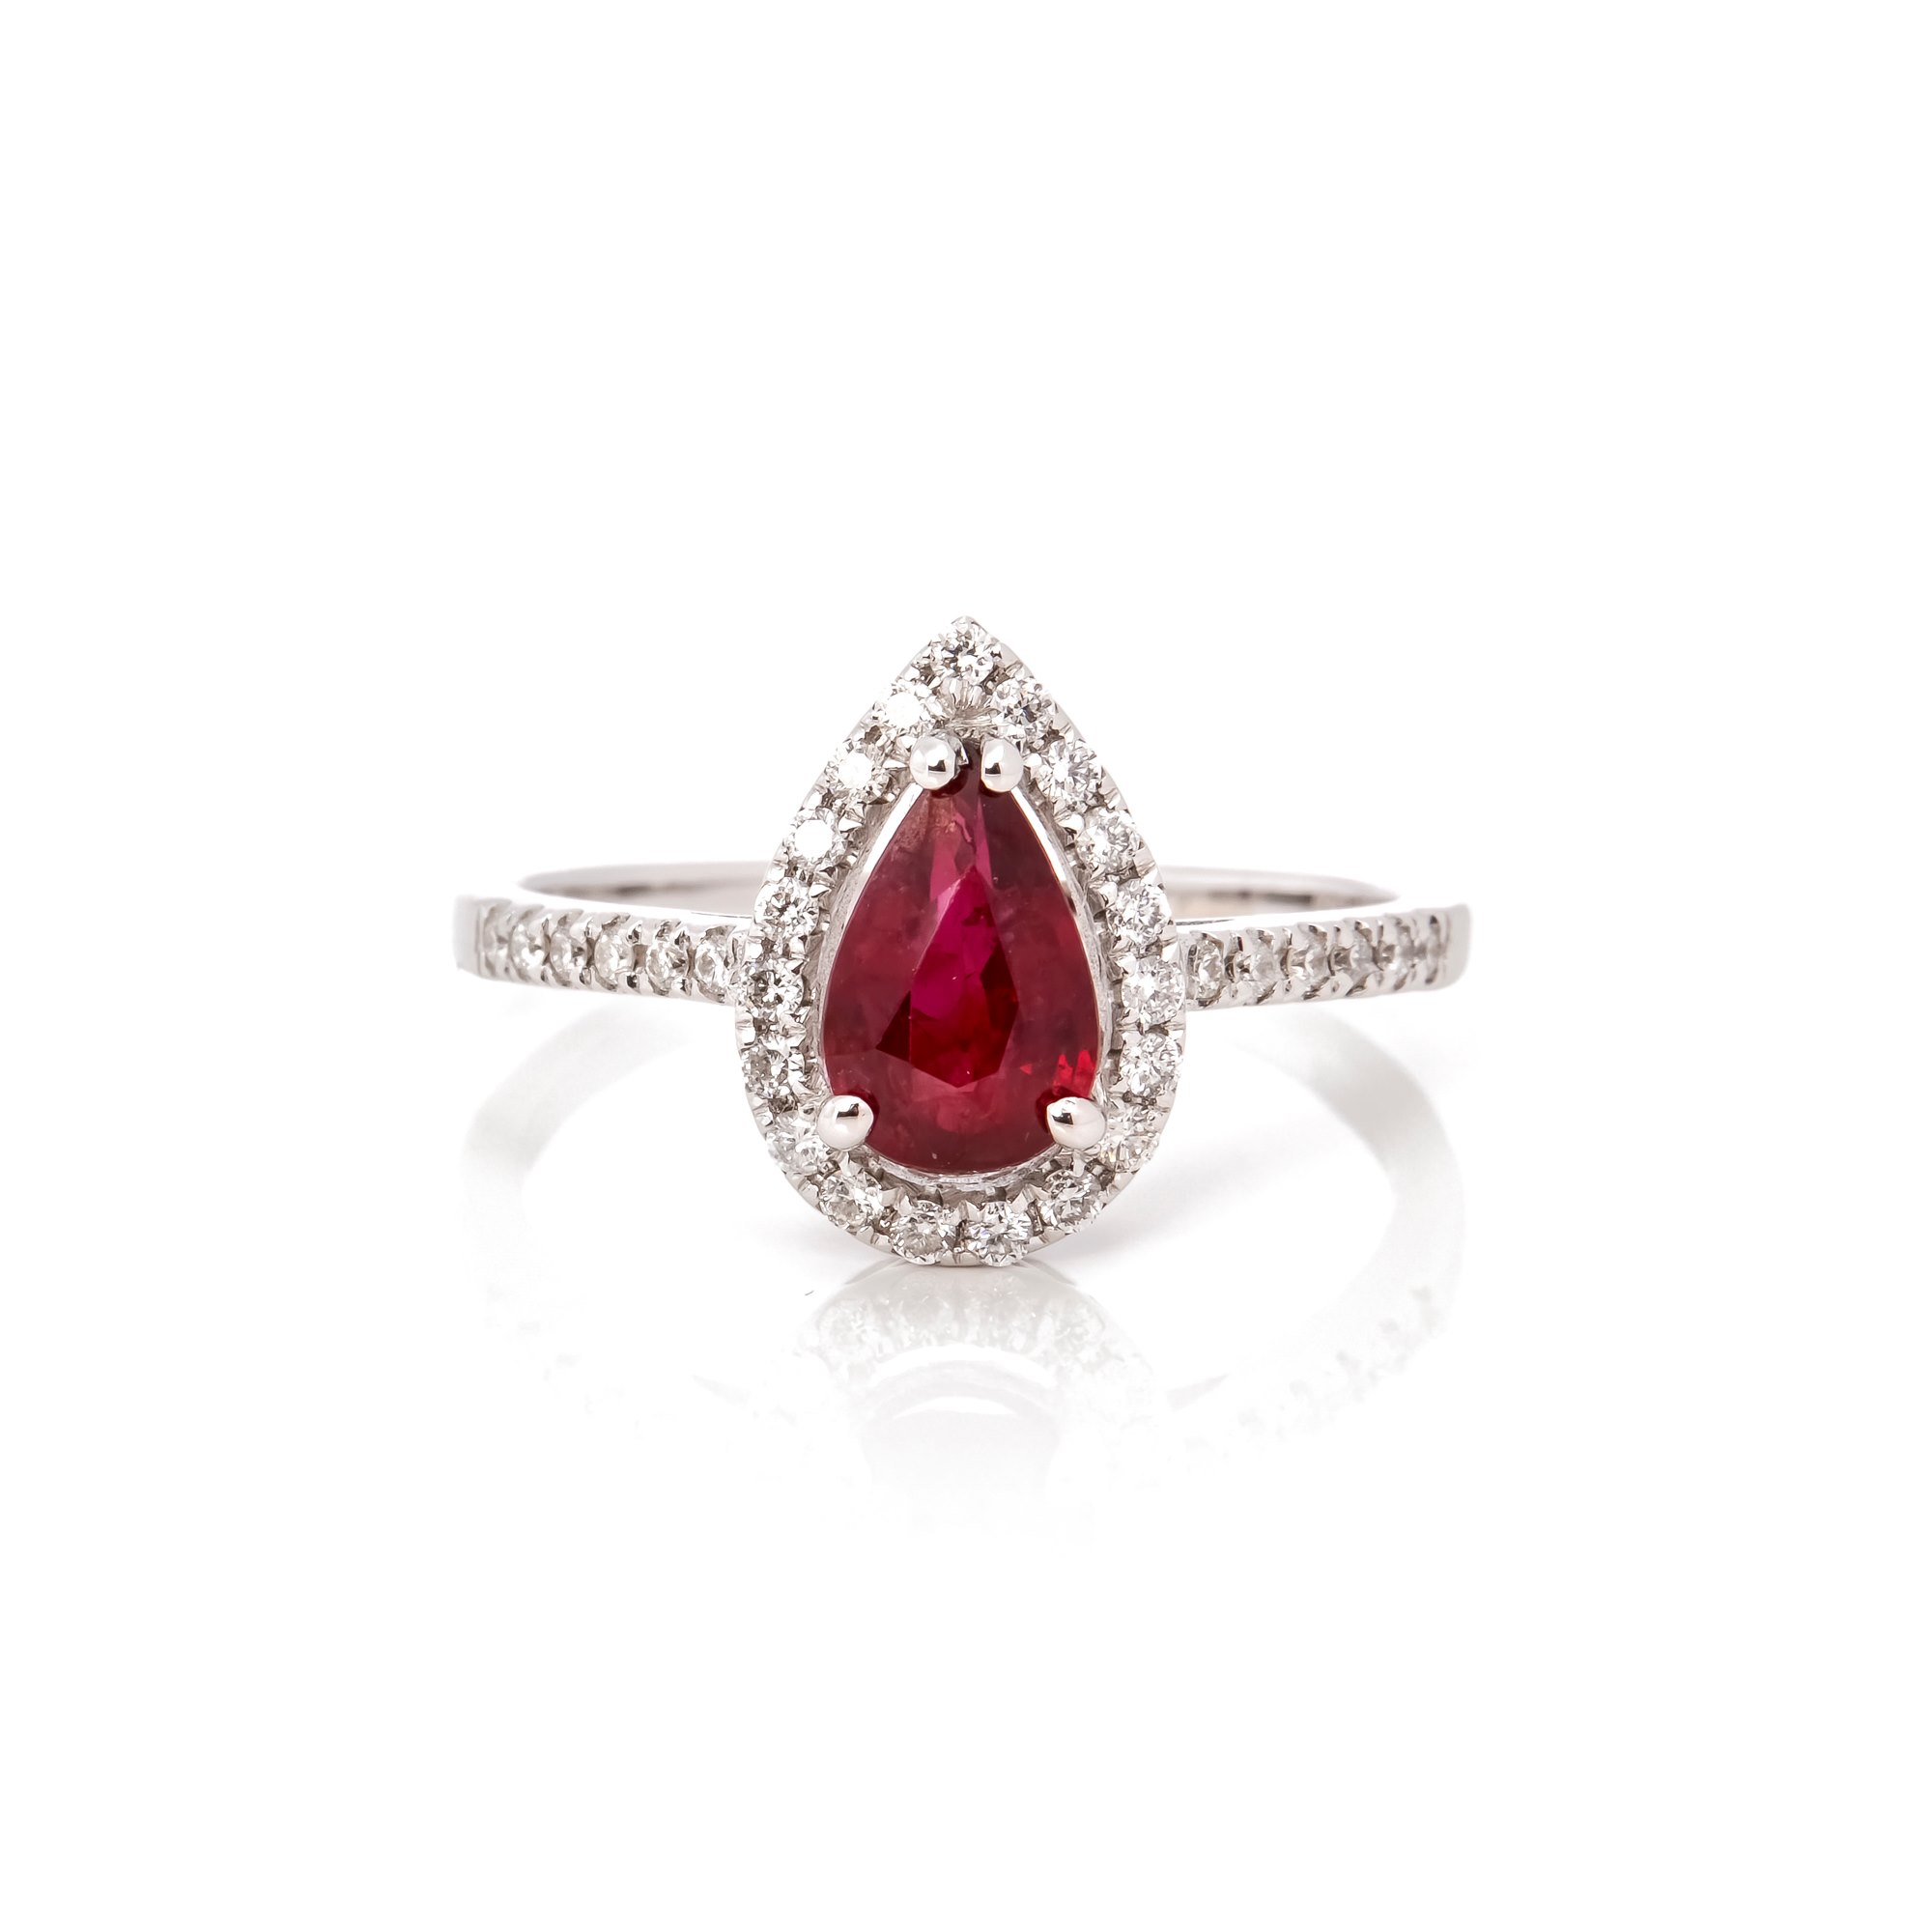 David Jerome Certified 1.11ct Pear Cut Ruby and Diamond Ring